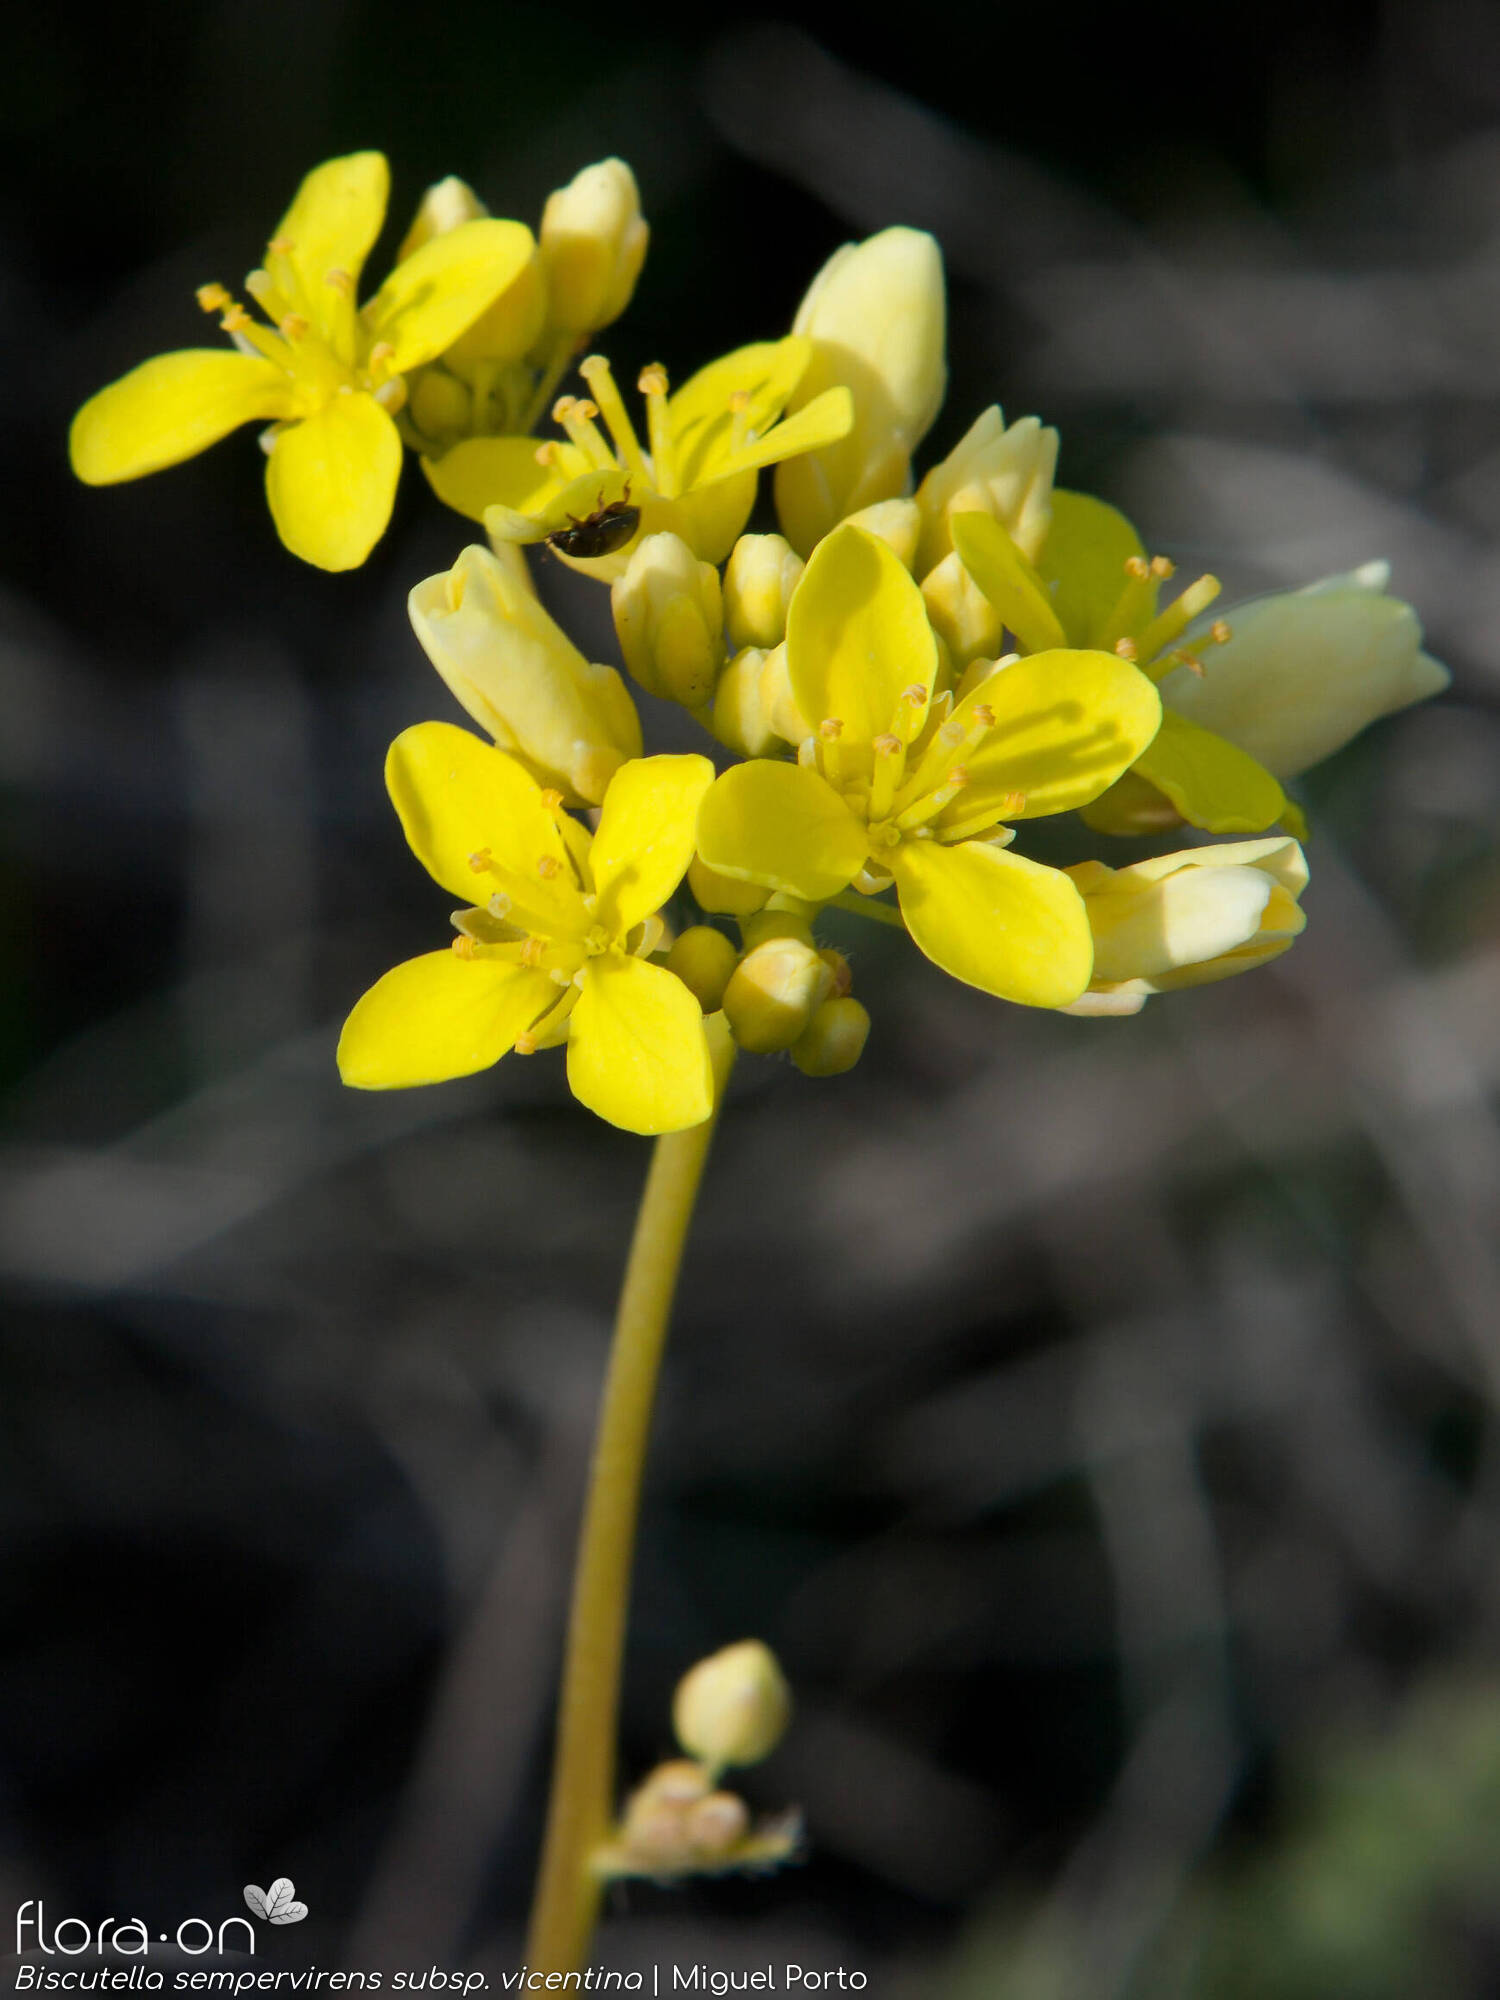 Biscutella sempervirens vicentina - Flor (geral) | Miguel Porto; CC BY-NC 4.0